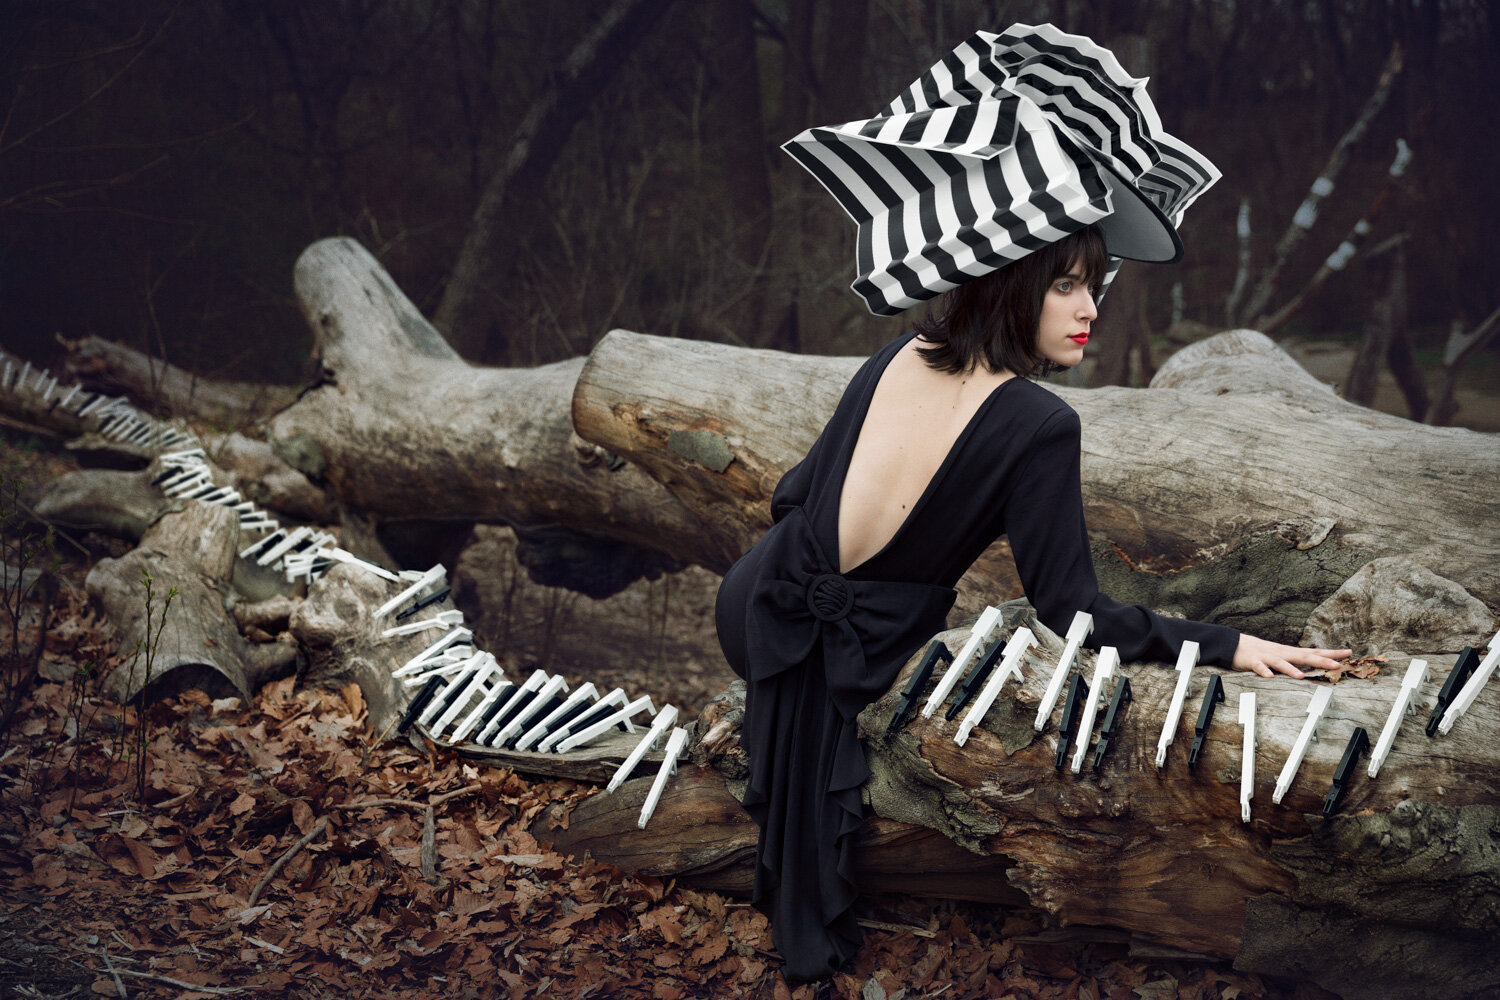 Creative portrait of musician Janna Pelle wearing a vintage open backed black dress and dramatic hat while lounging on a fallen tree that is covered in piano keys by portrait photographer Hanna Agar